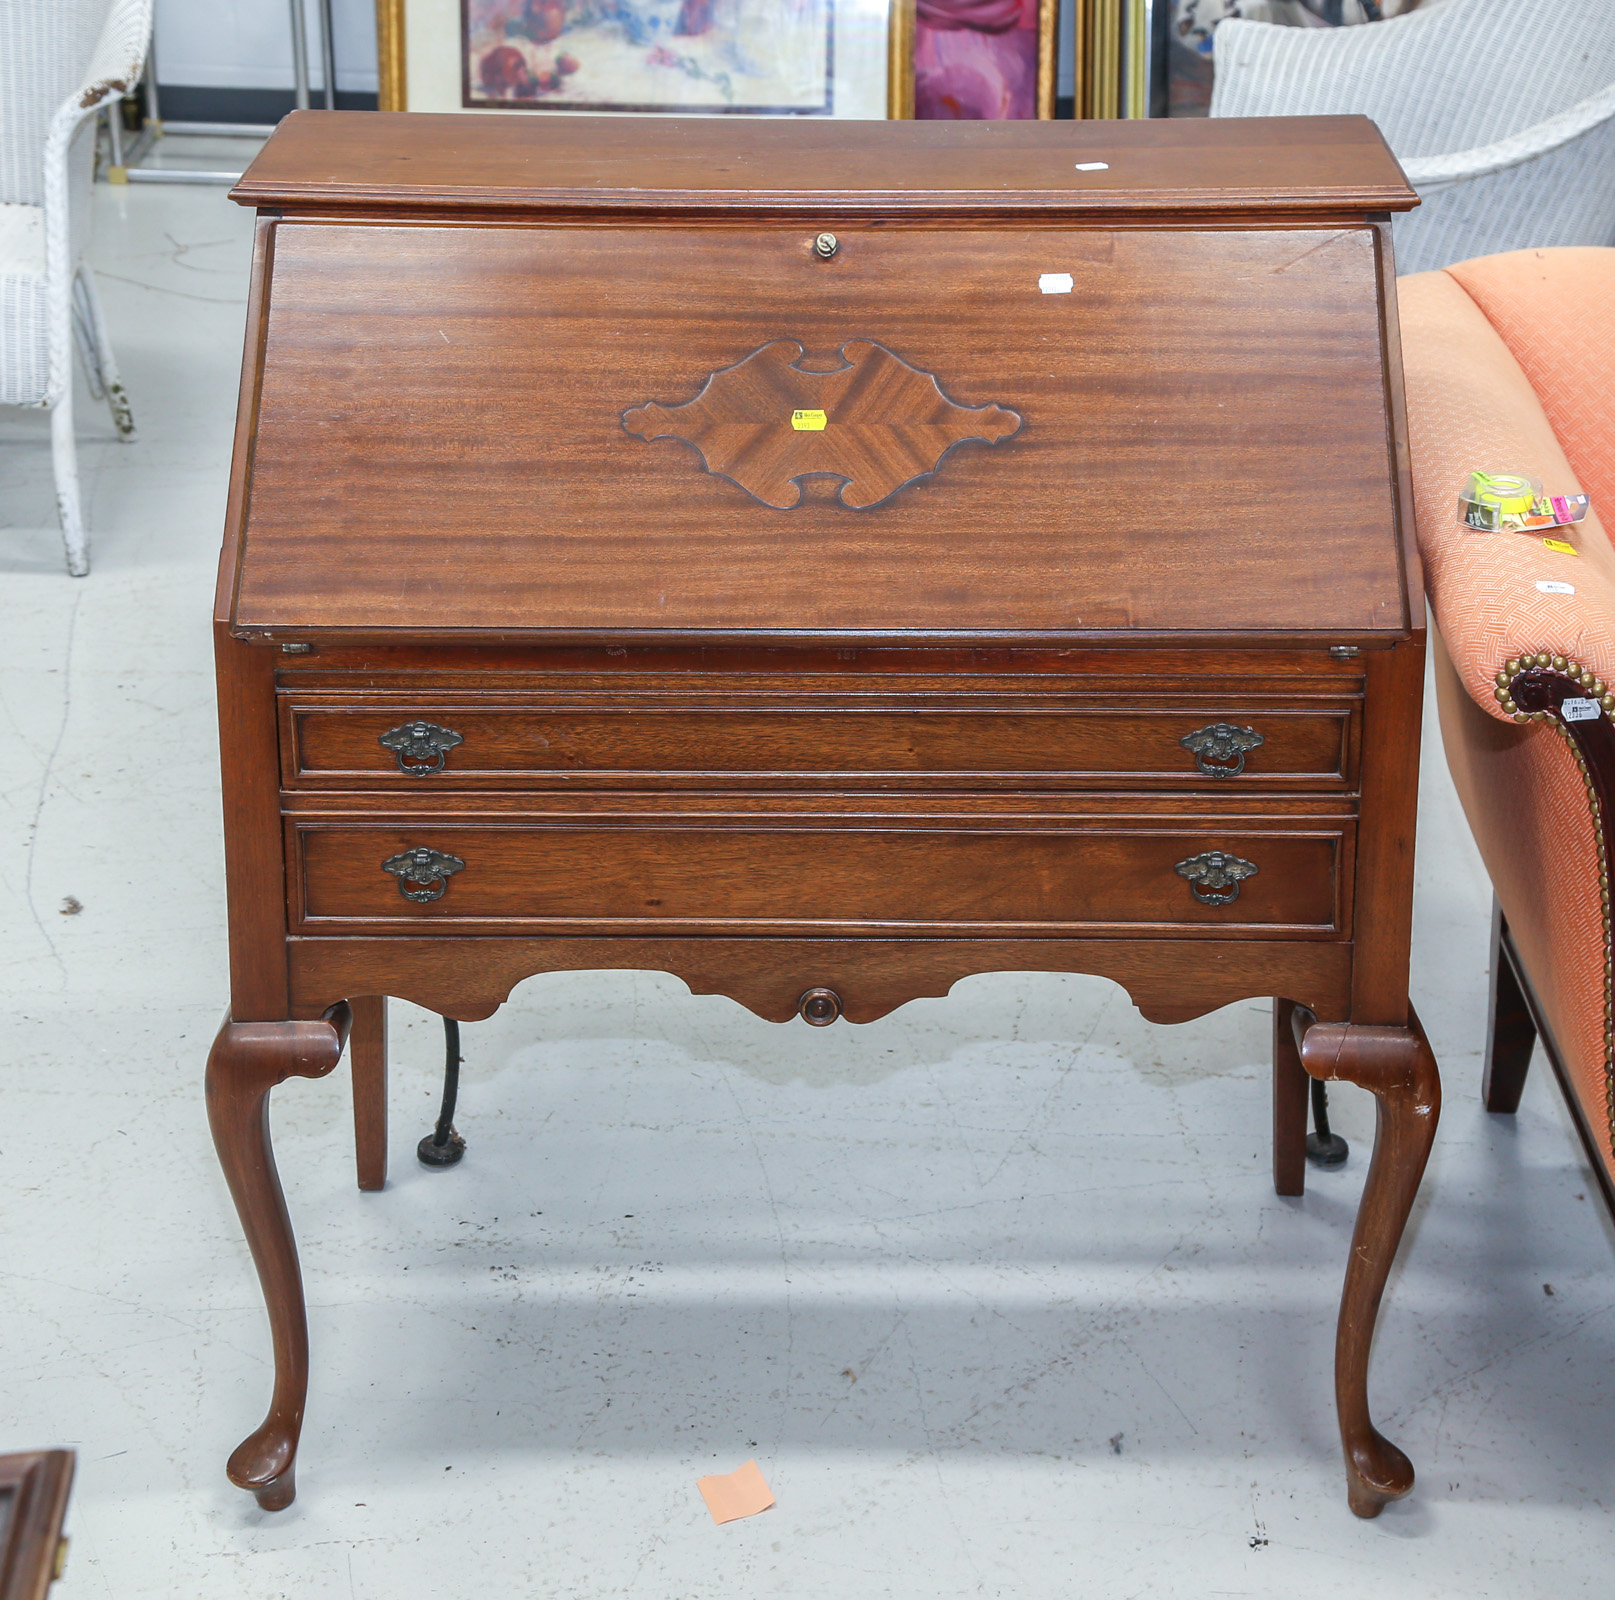 QUEEN ANNE STYLE MAHOGANY DESK